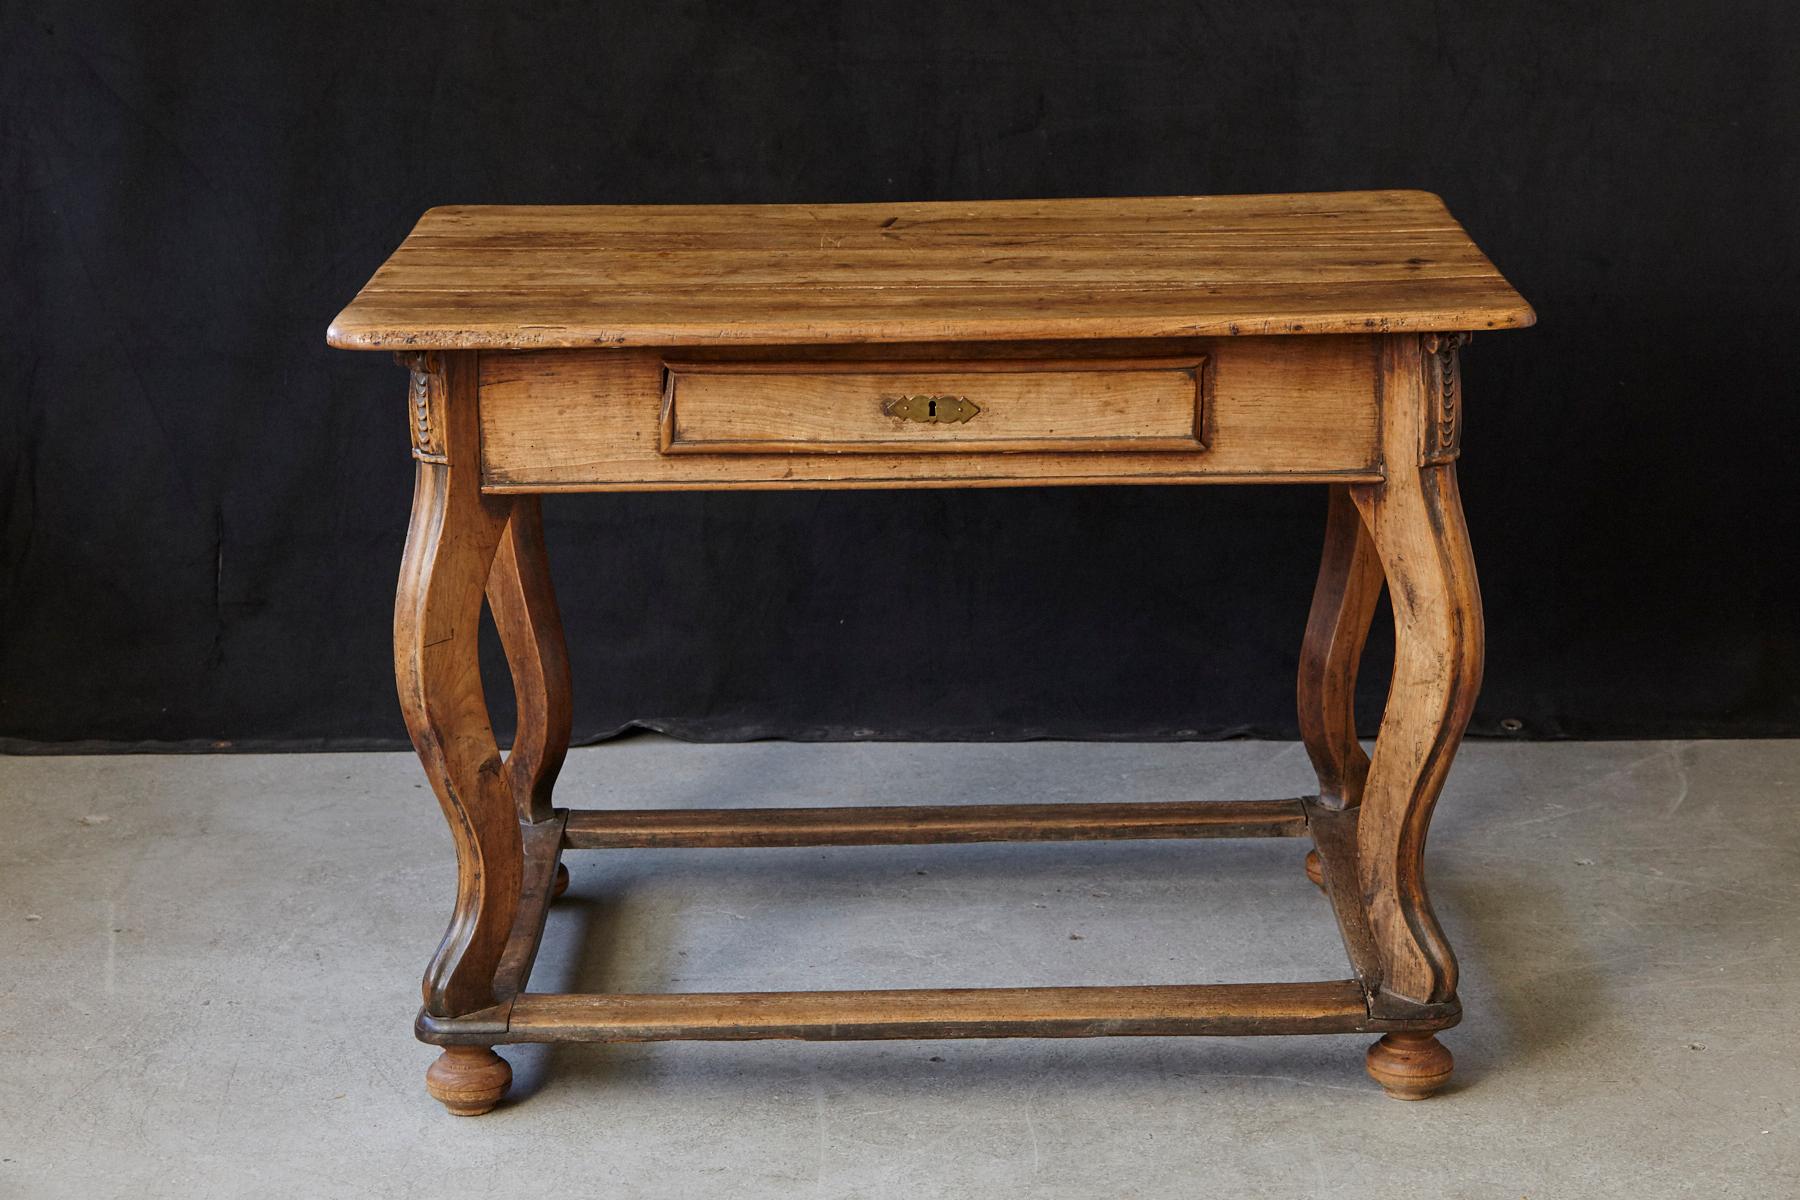 Beautiful, puristic Austrian farm house table in fruitwood with a beautiful patina good for multiple purposes as a kitchen table of library table for example.
Slightly scrolled legs mounted on a box stretcher, simple carvings on the corners, a